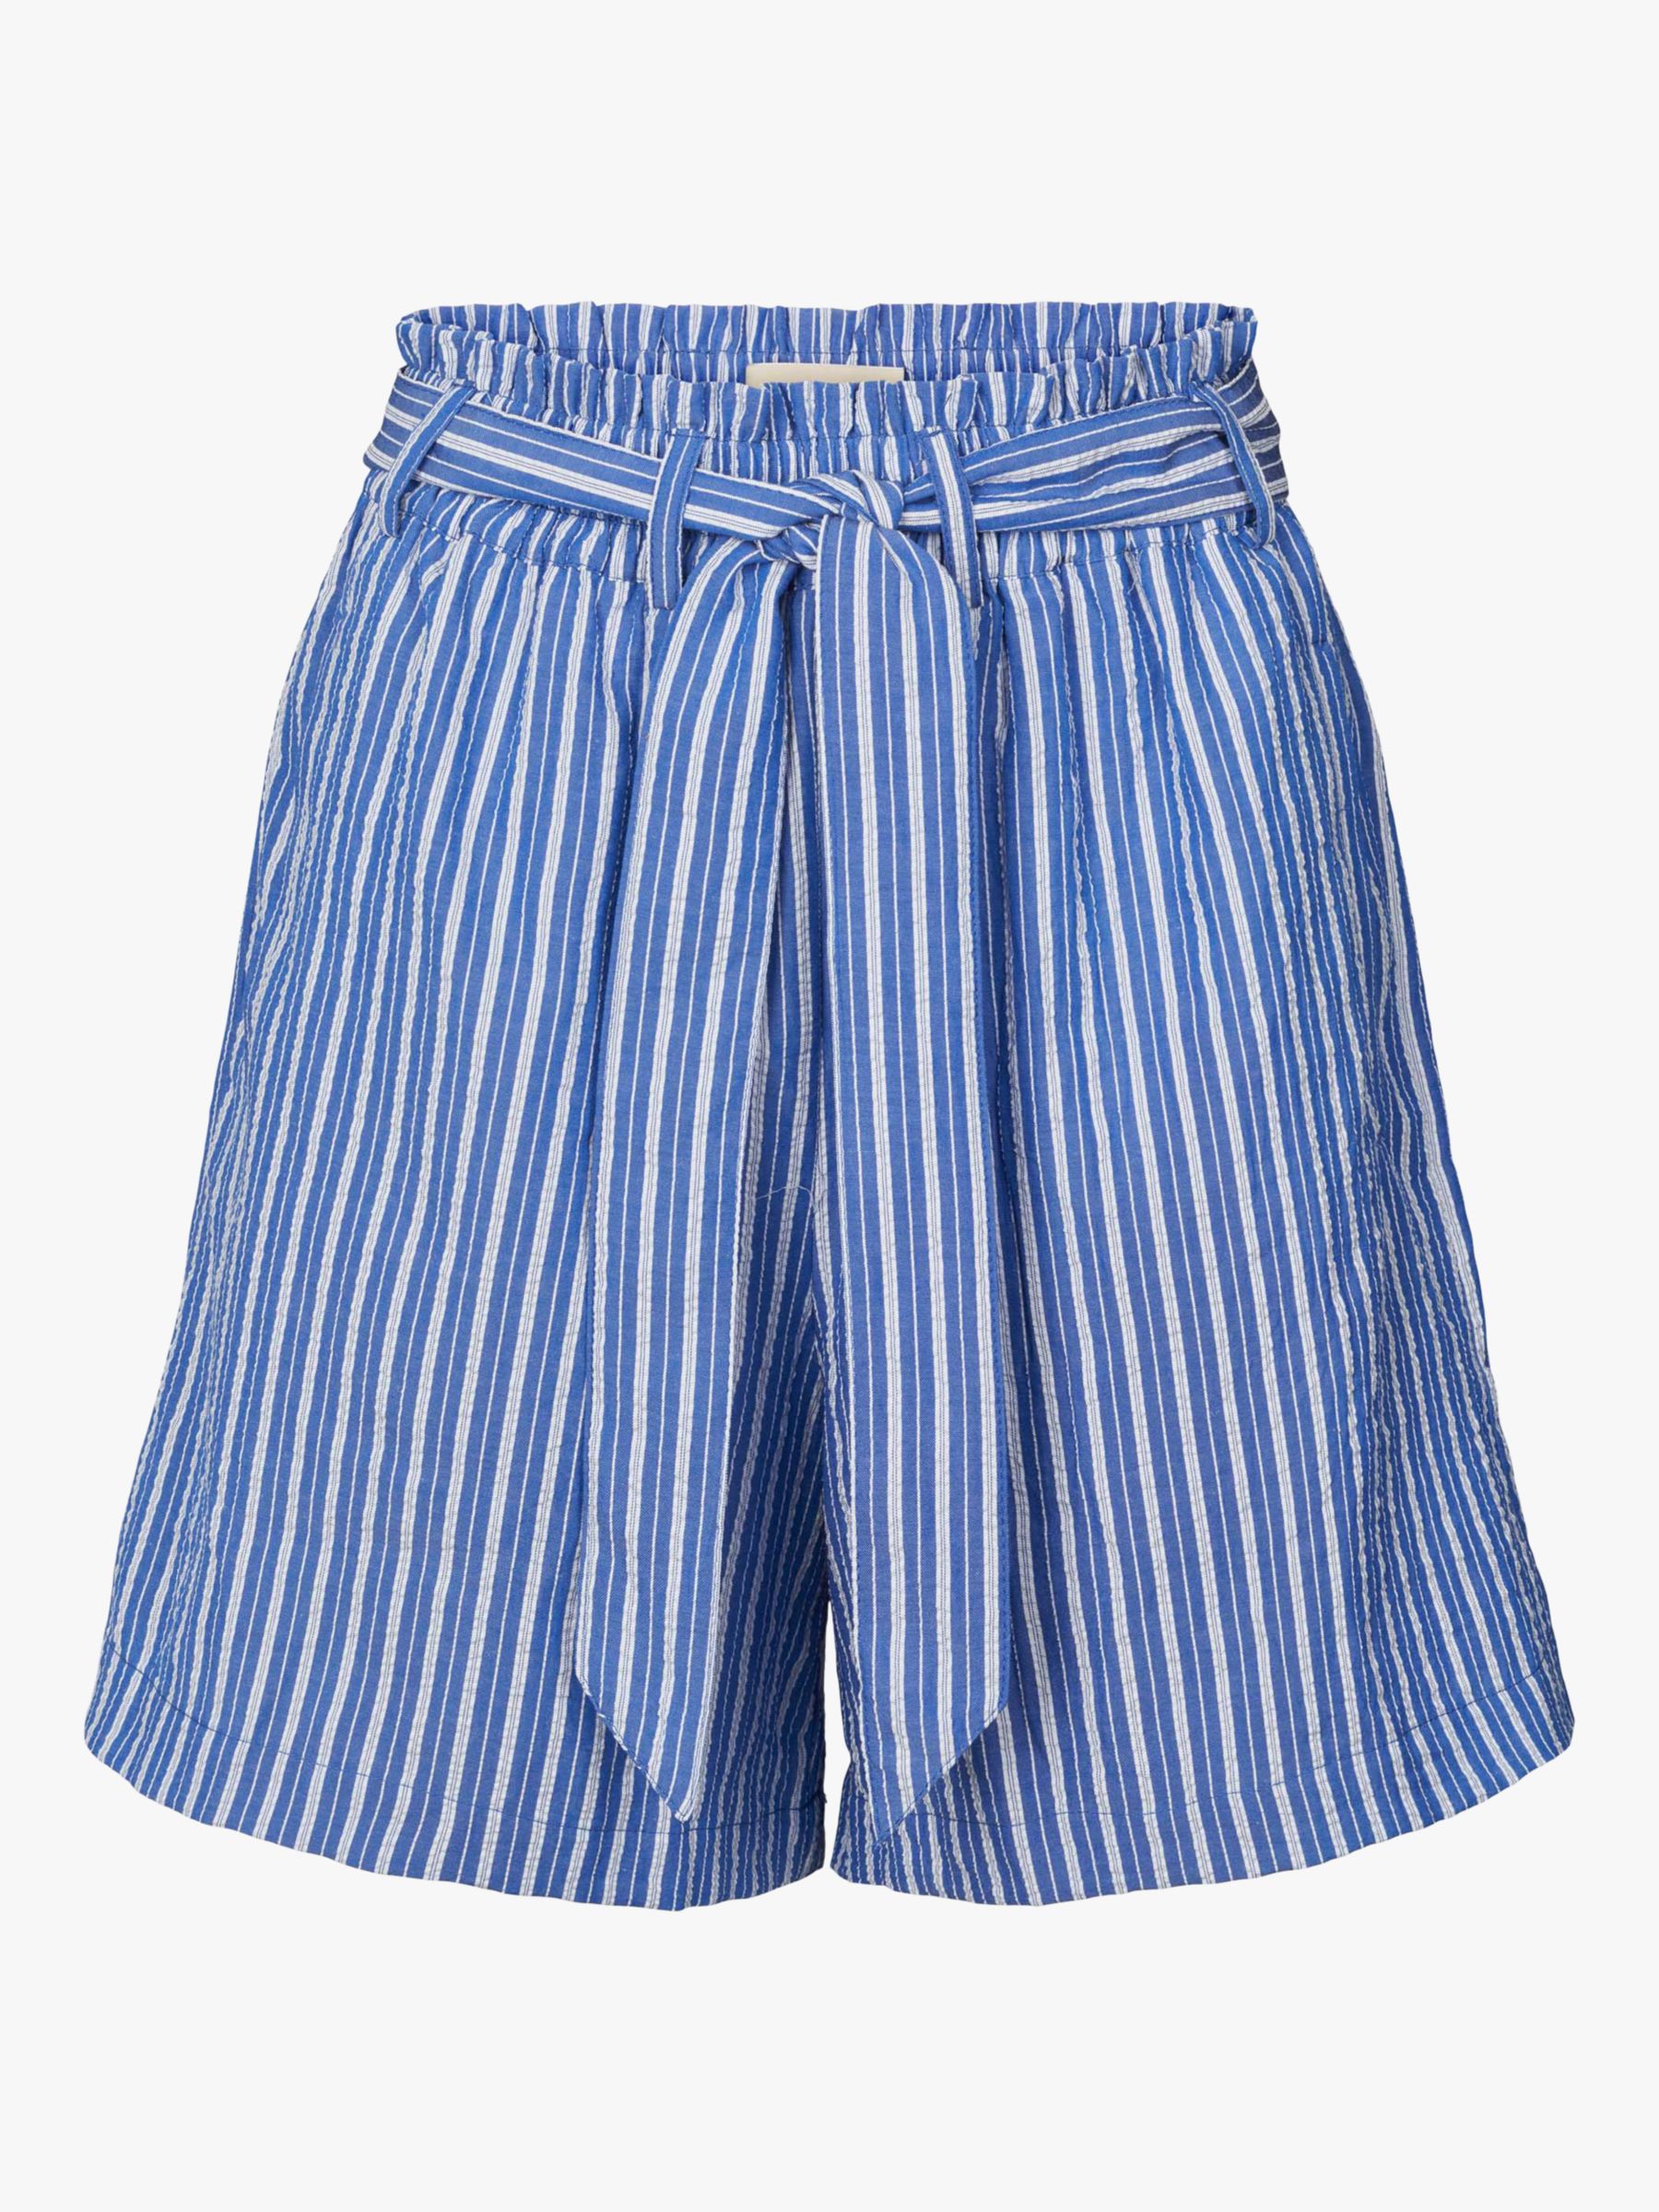 Buy Lollys Laundry Striped Blanca Shorts, Blue Online at johnlewis.com